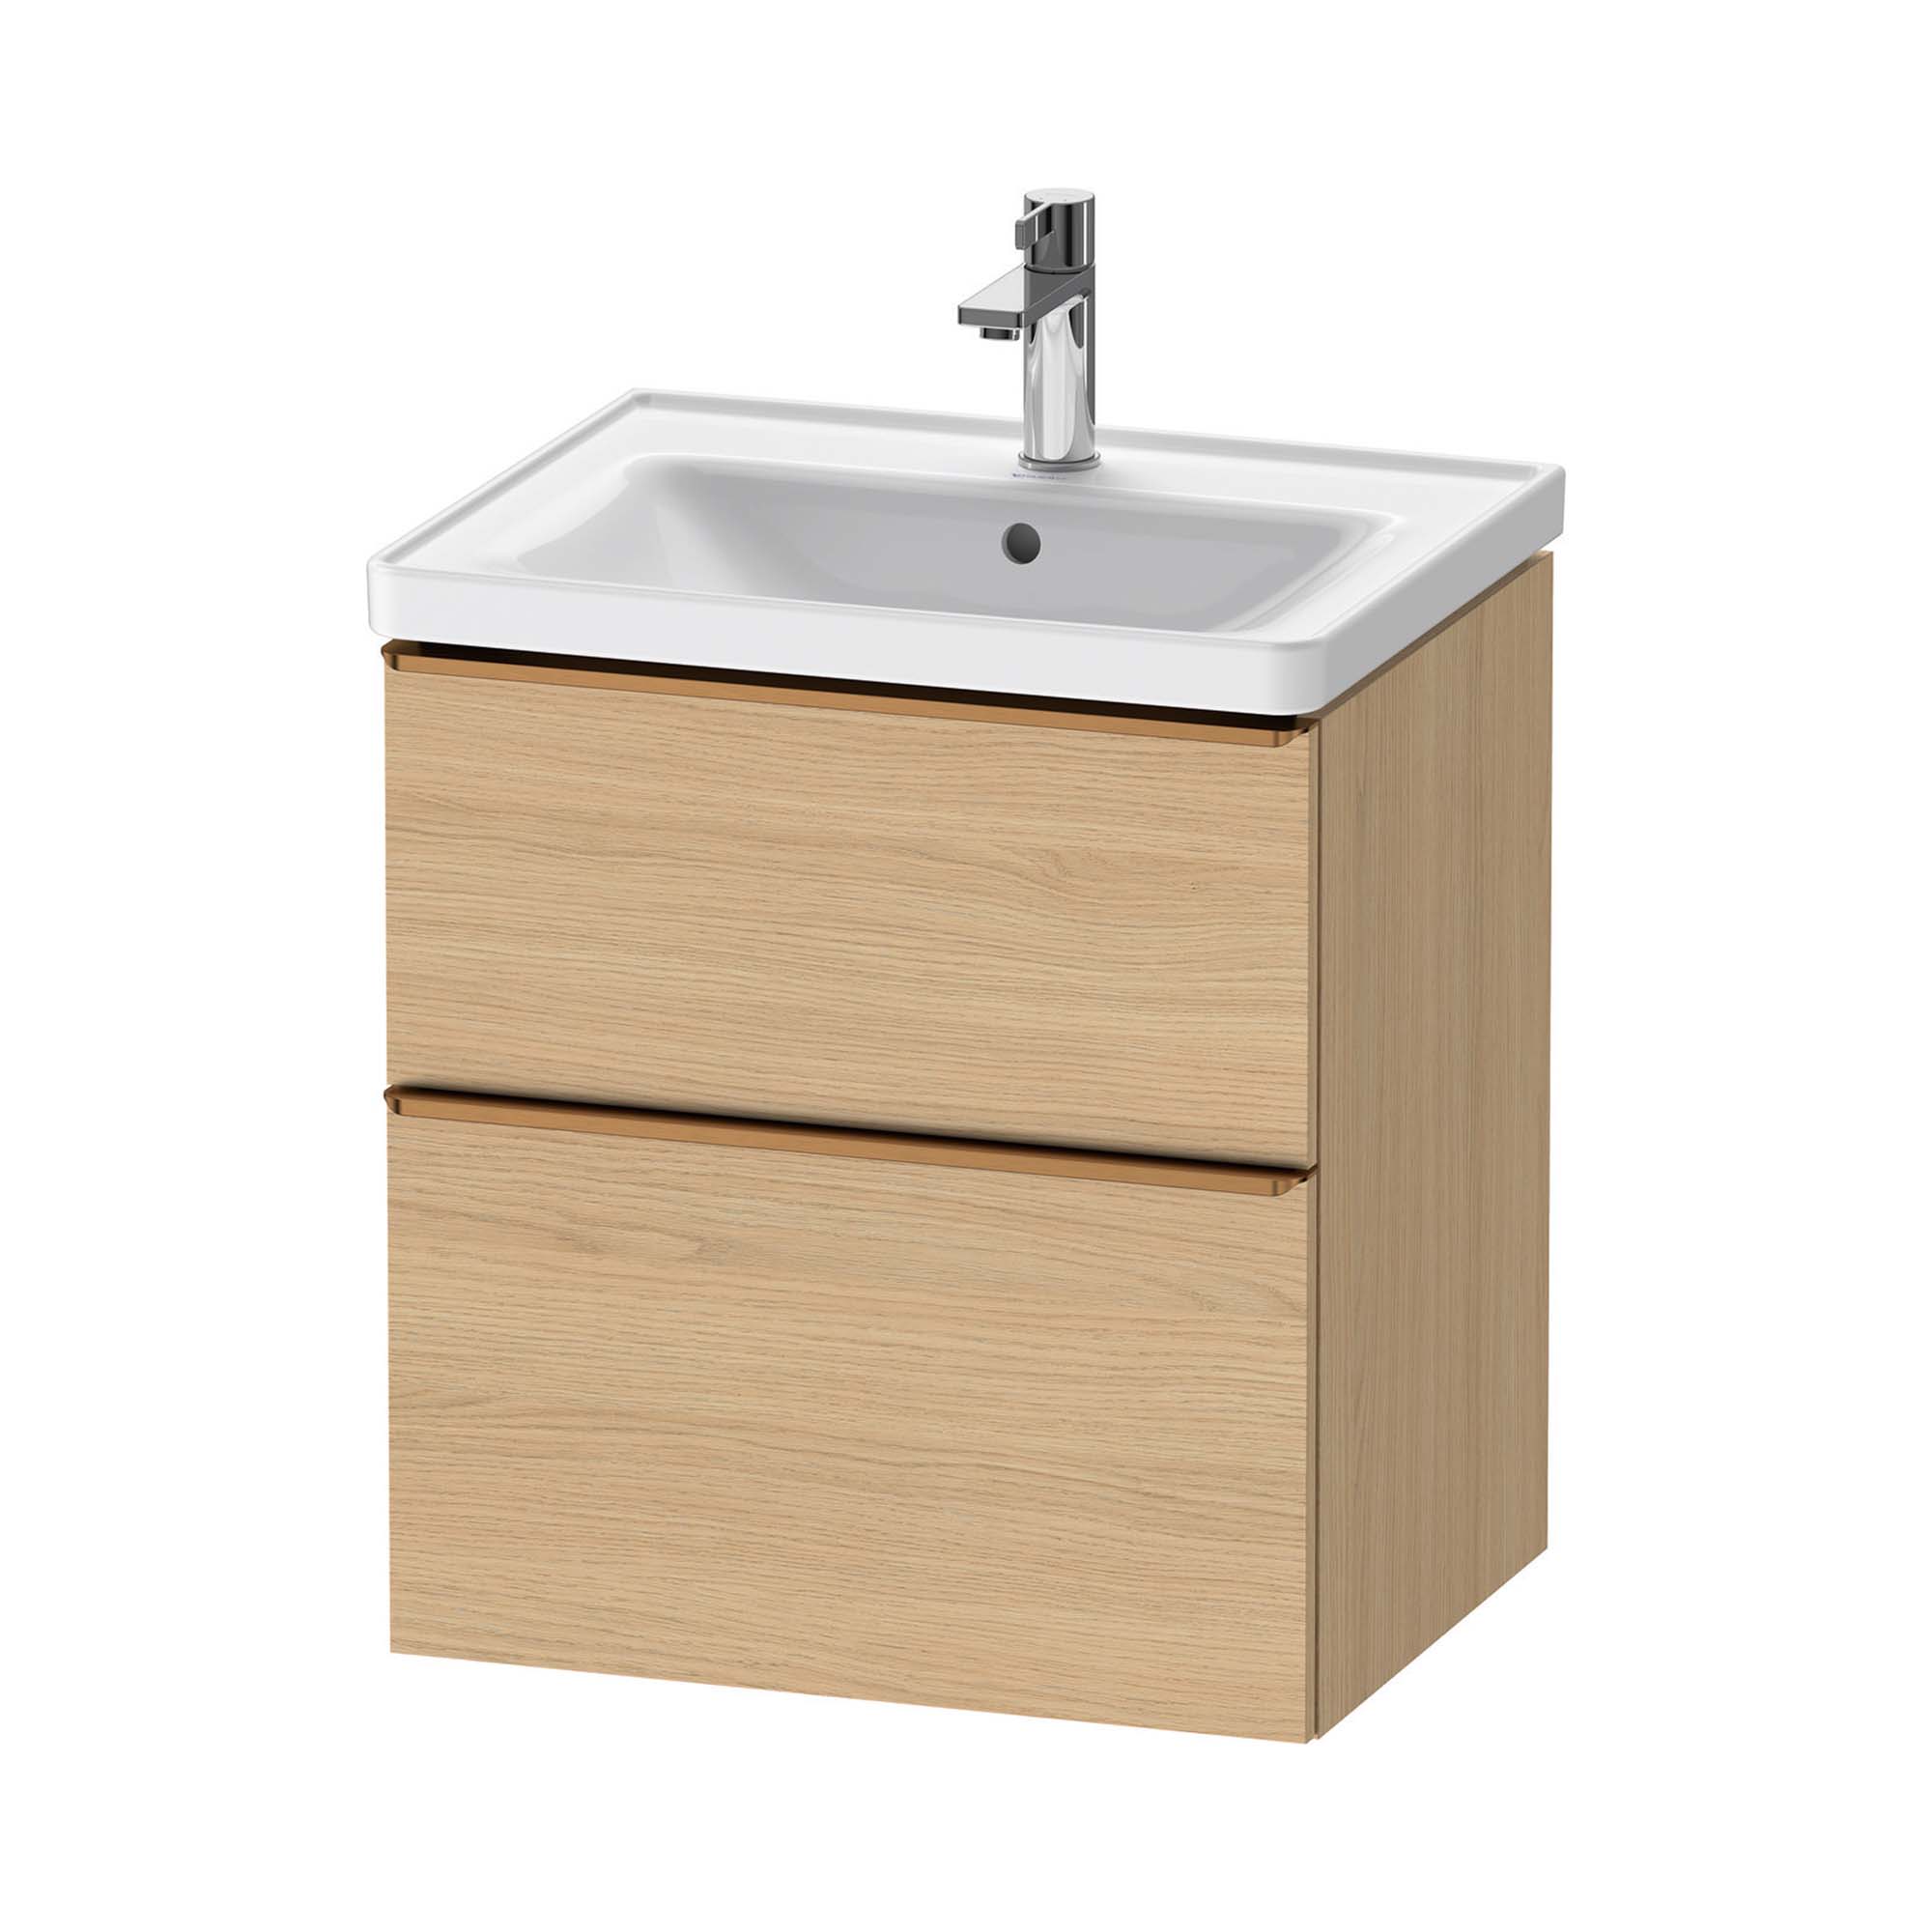 duravit d-neo 600 wall mounted vanity unit with d-neo basin natural oak brushed bronze handles